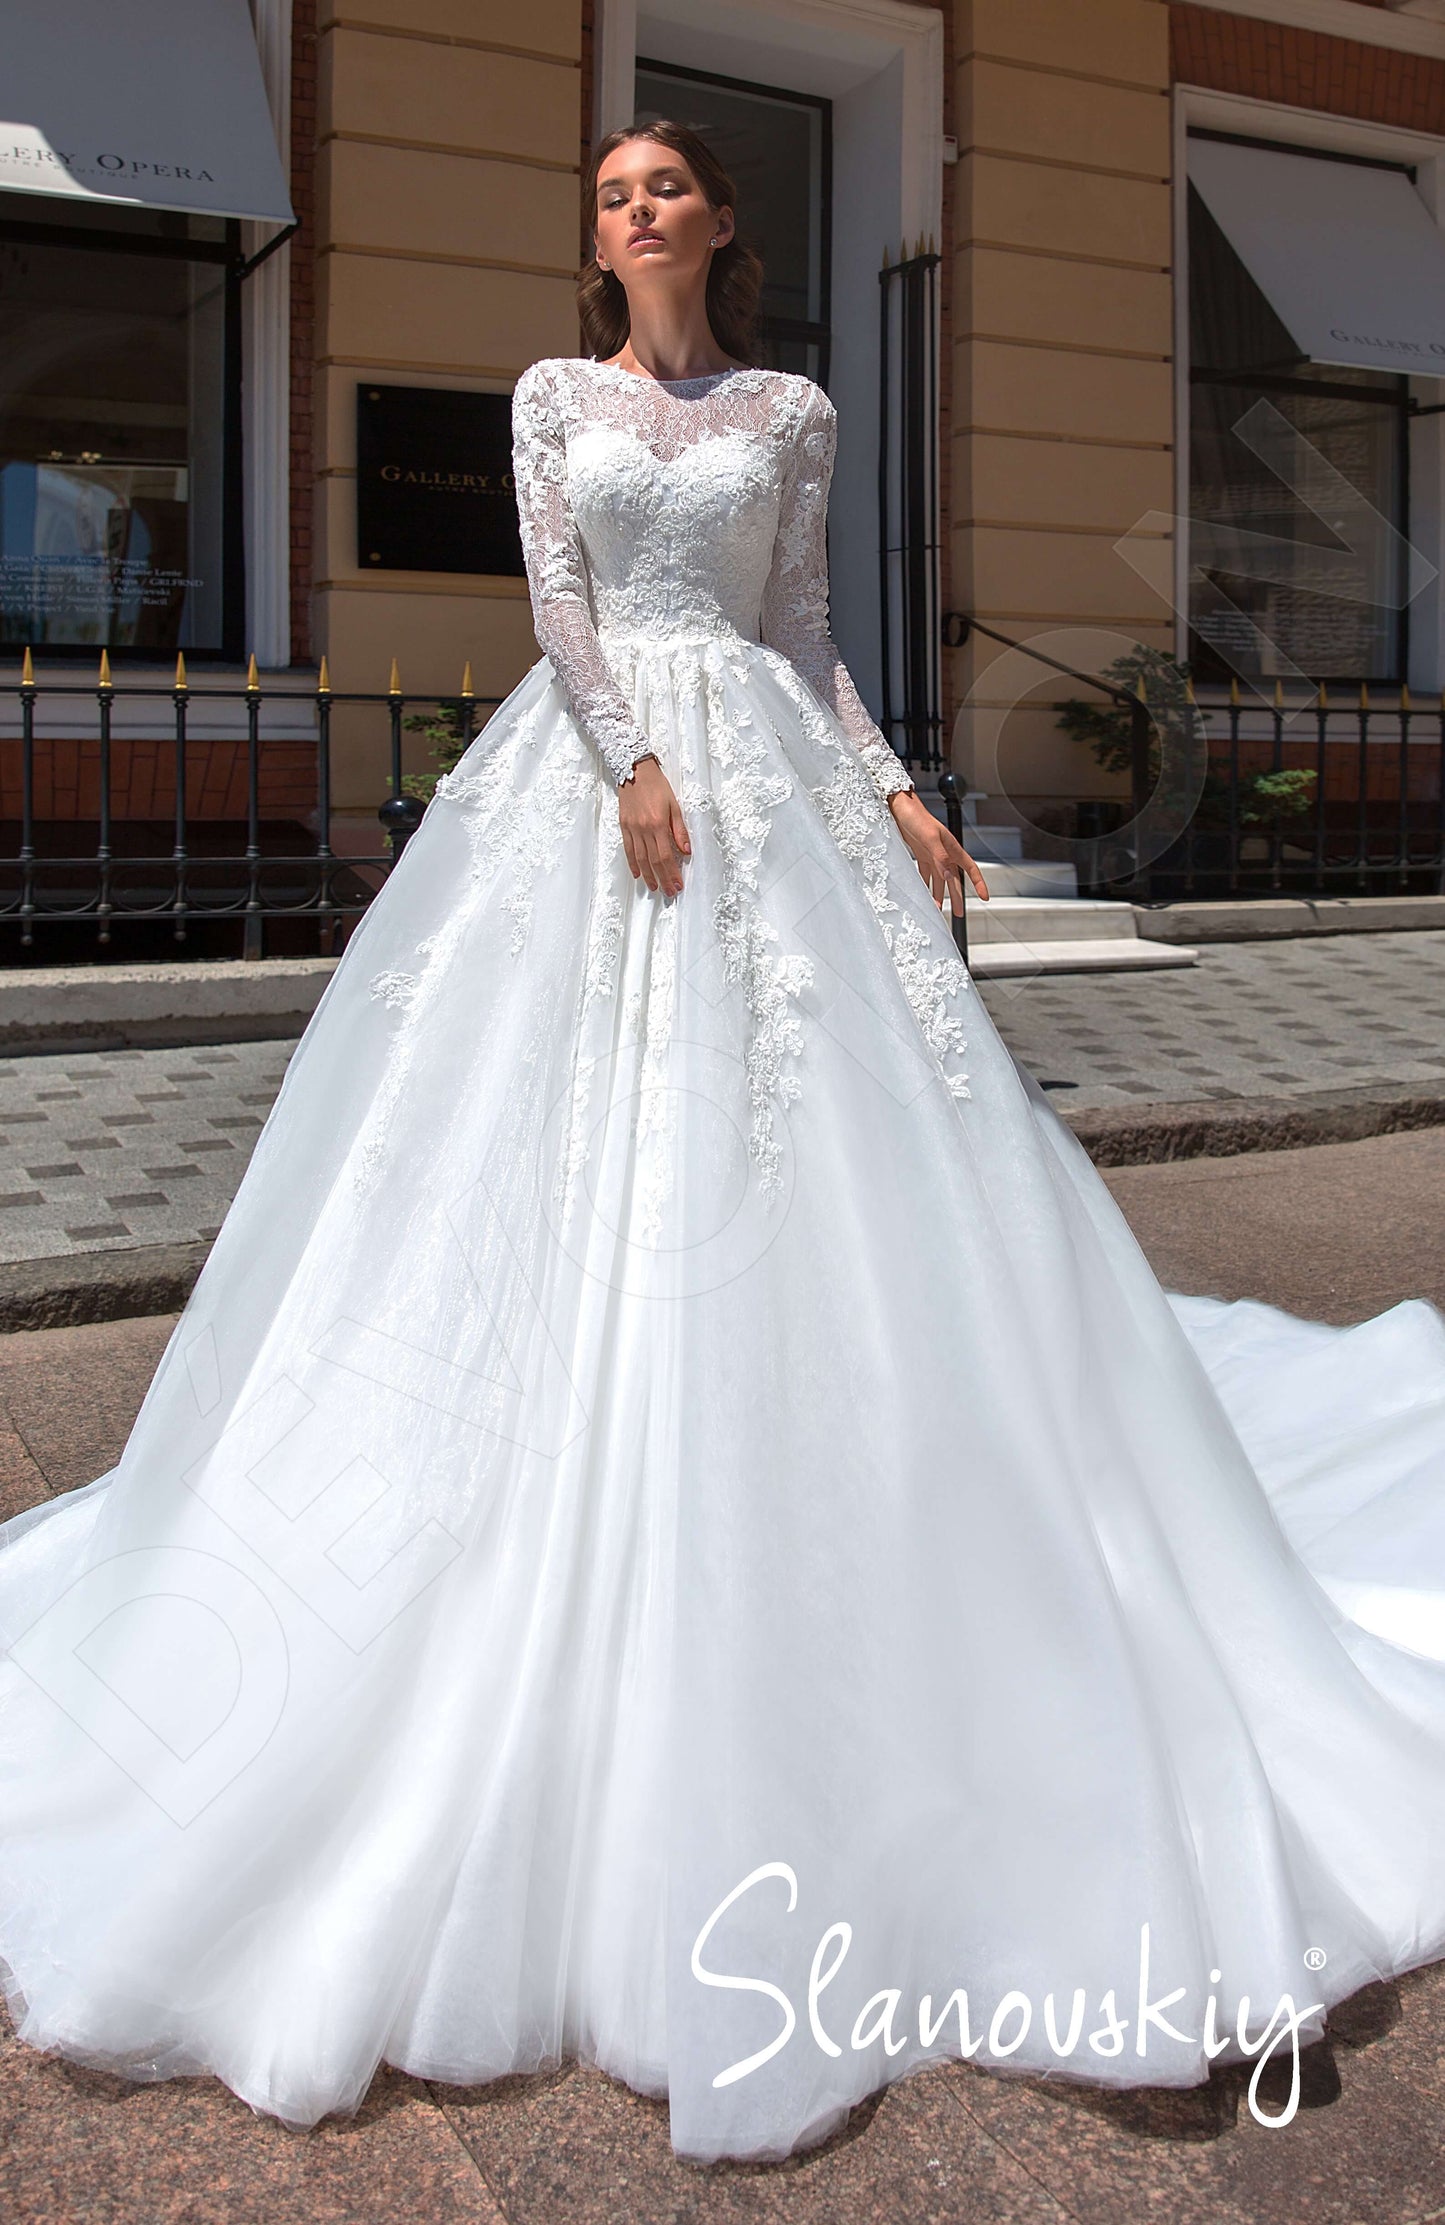 Cecilly Lace up back Princess/Ball Gown Long sleeve Wedding Dress Front